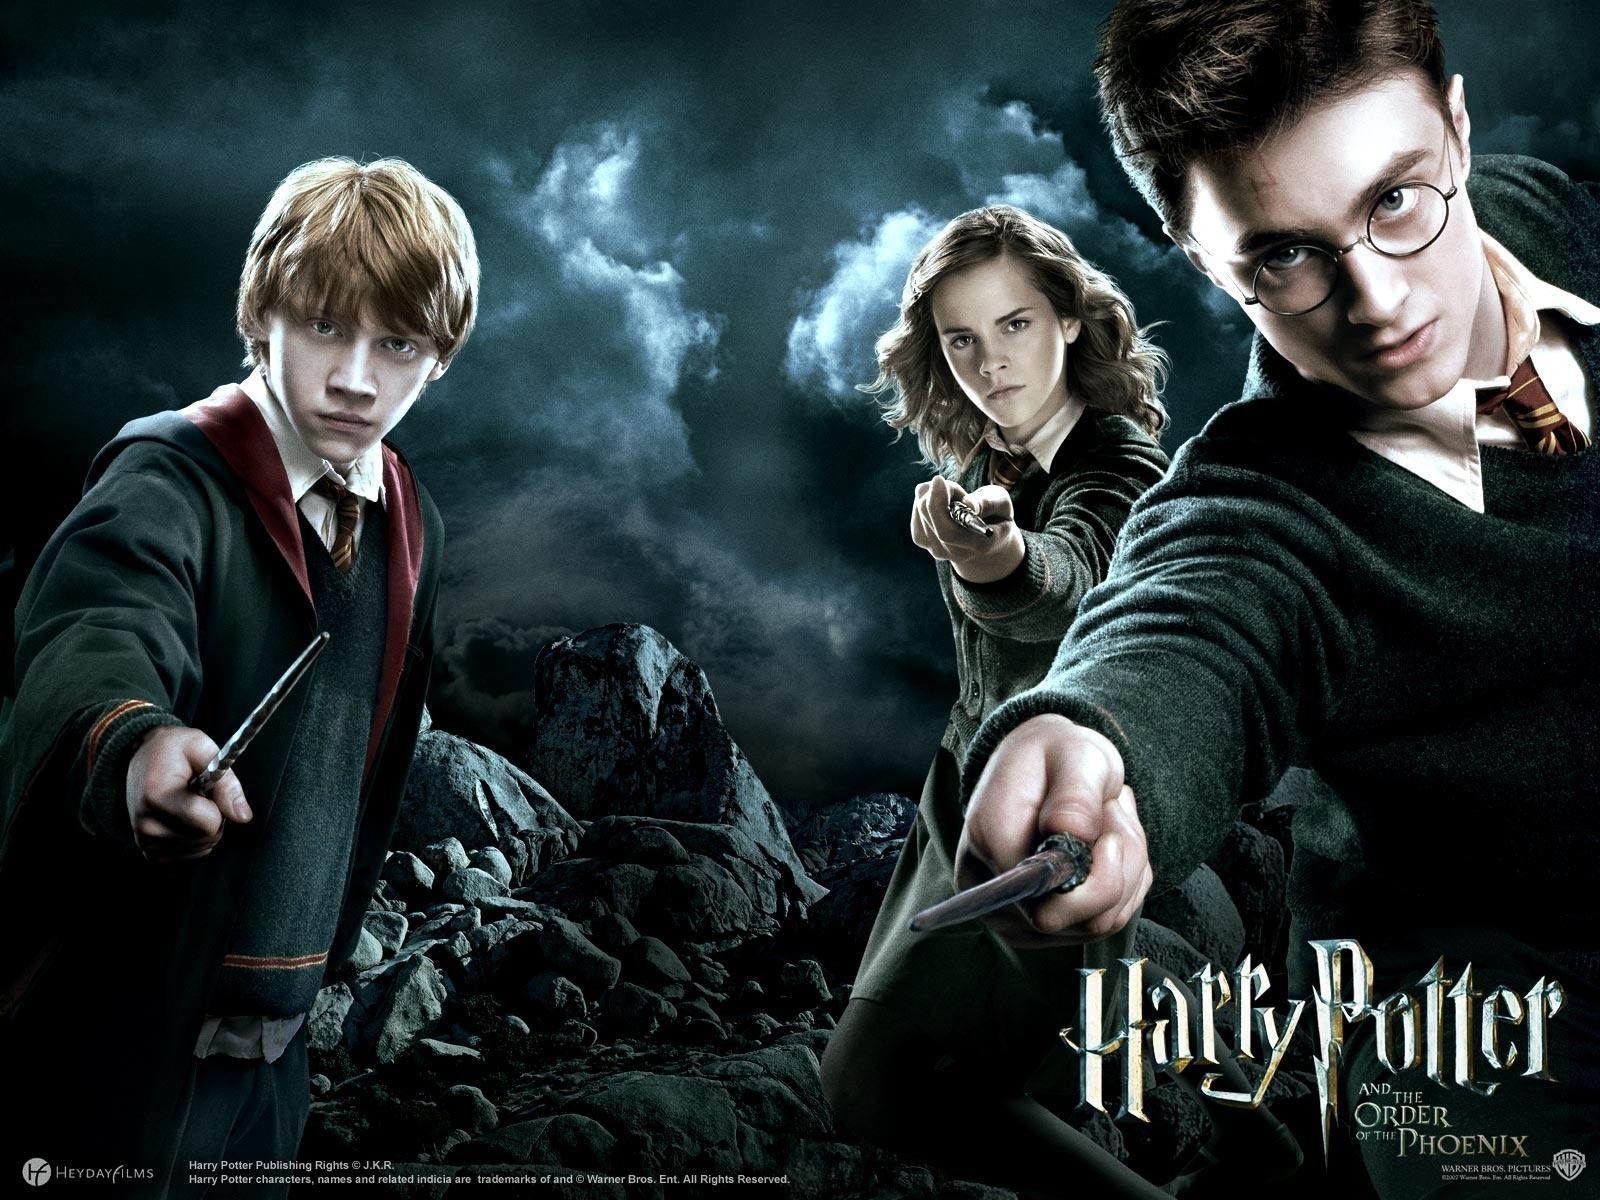 harry potter movie wallpaper,movie,photography,darkness,adventure game,fictional character